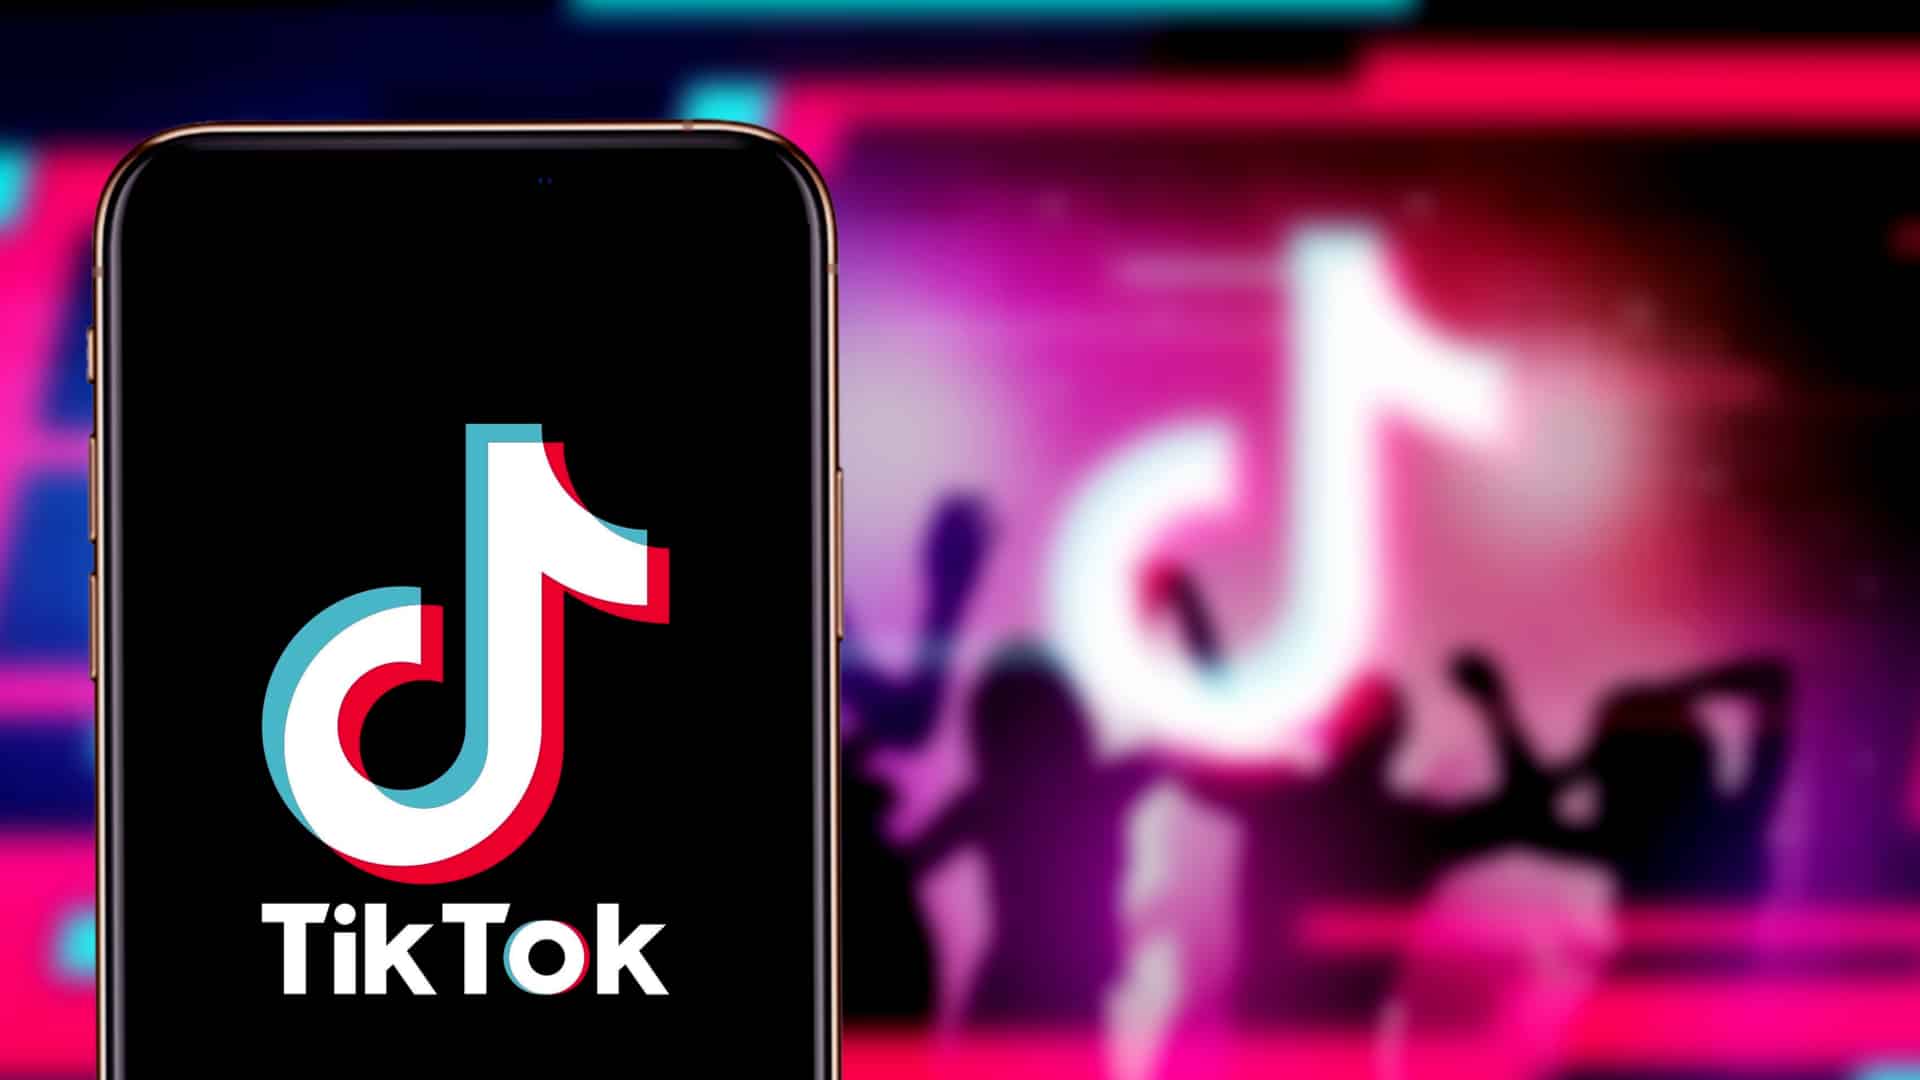 Zefr promises brand safety on TikTok with new AI offering